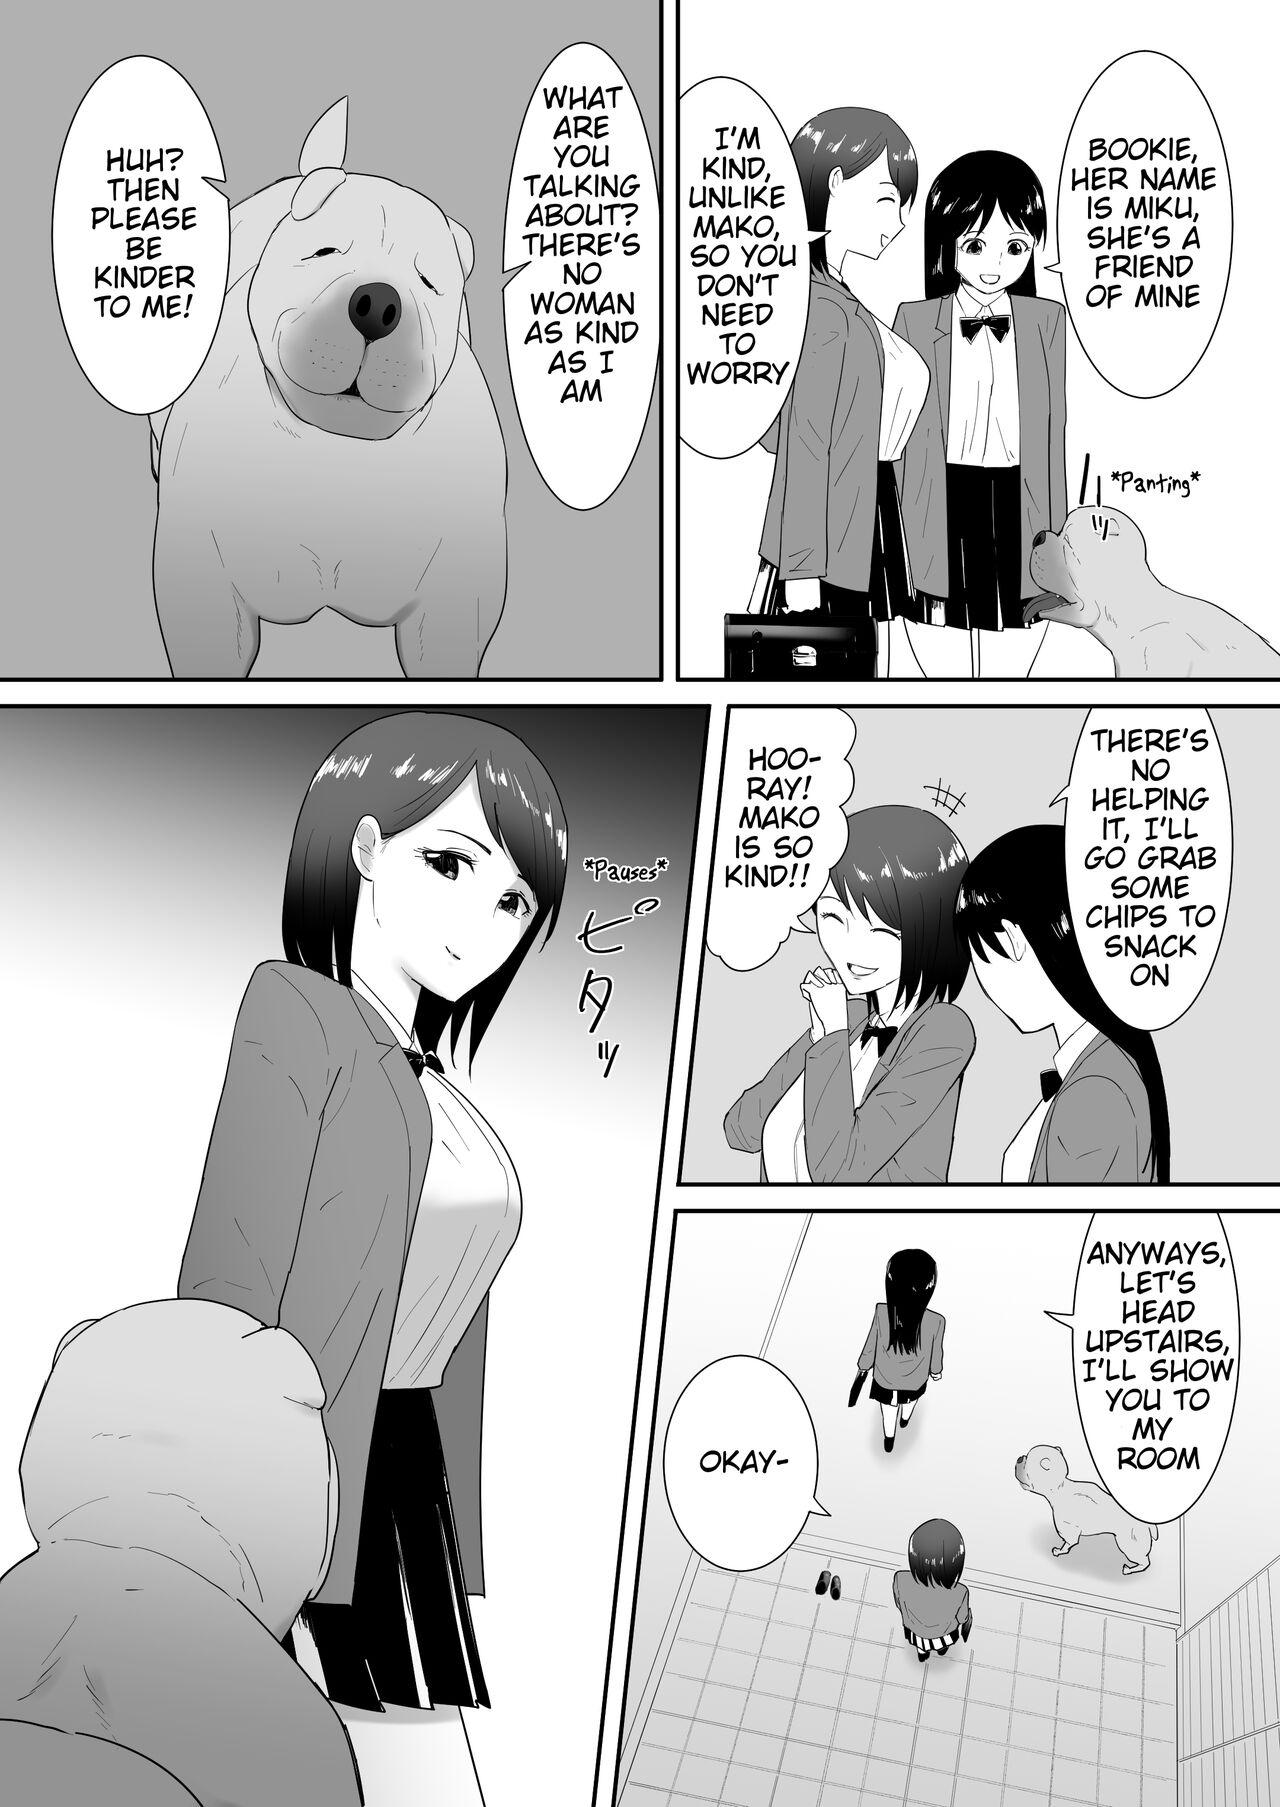 Teenager Tomodachi no Pet to | With My Friend's Pet - Original Thuylinh - Page 5